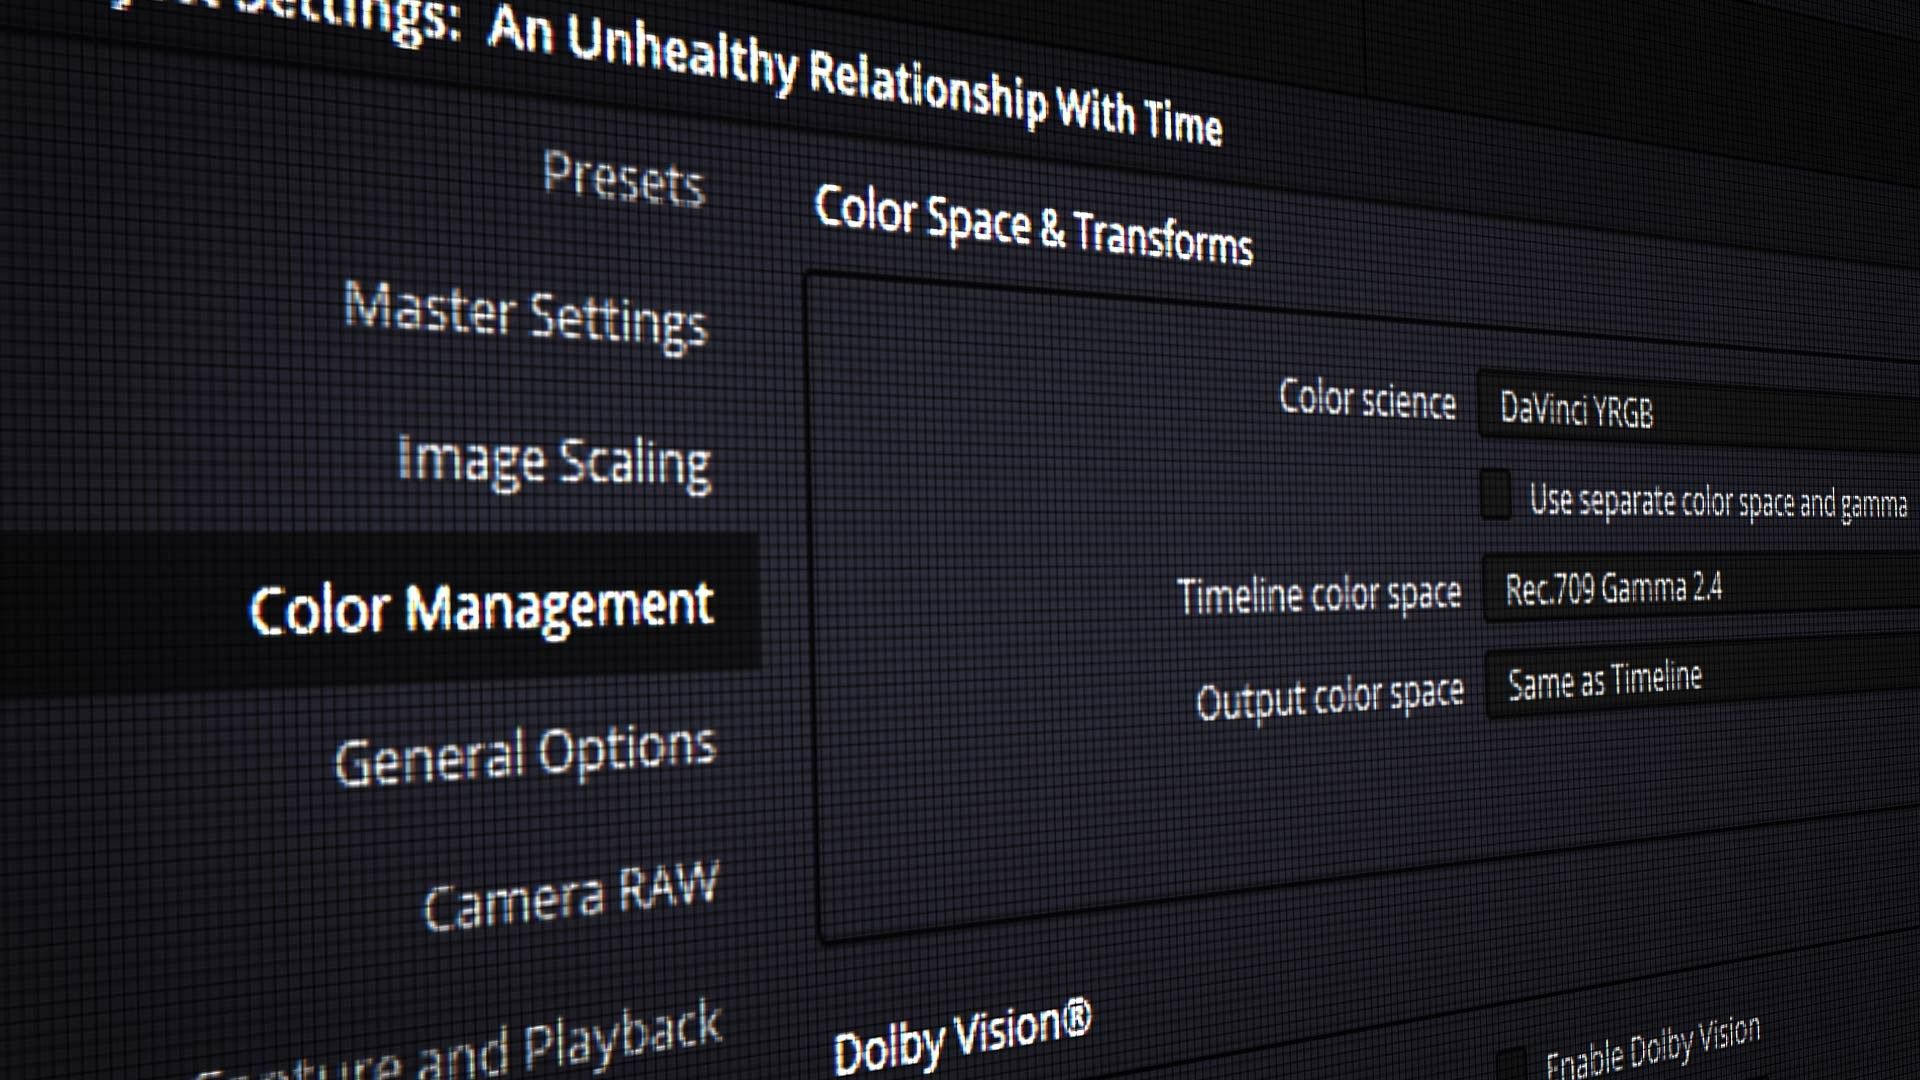 Color Space Settings In Resolve Are Extremely Useful and Important